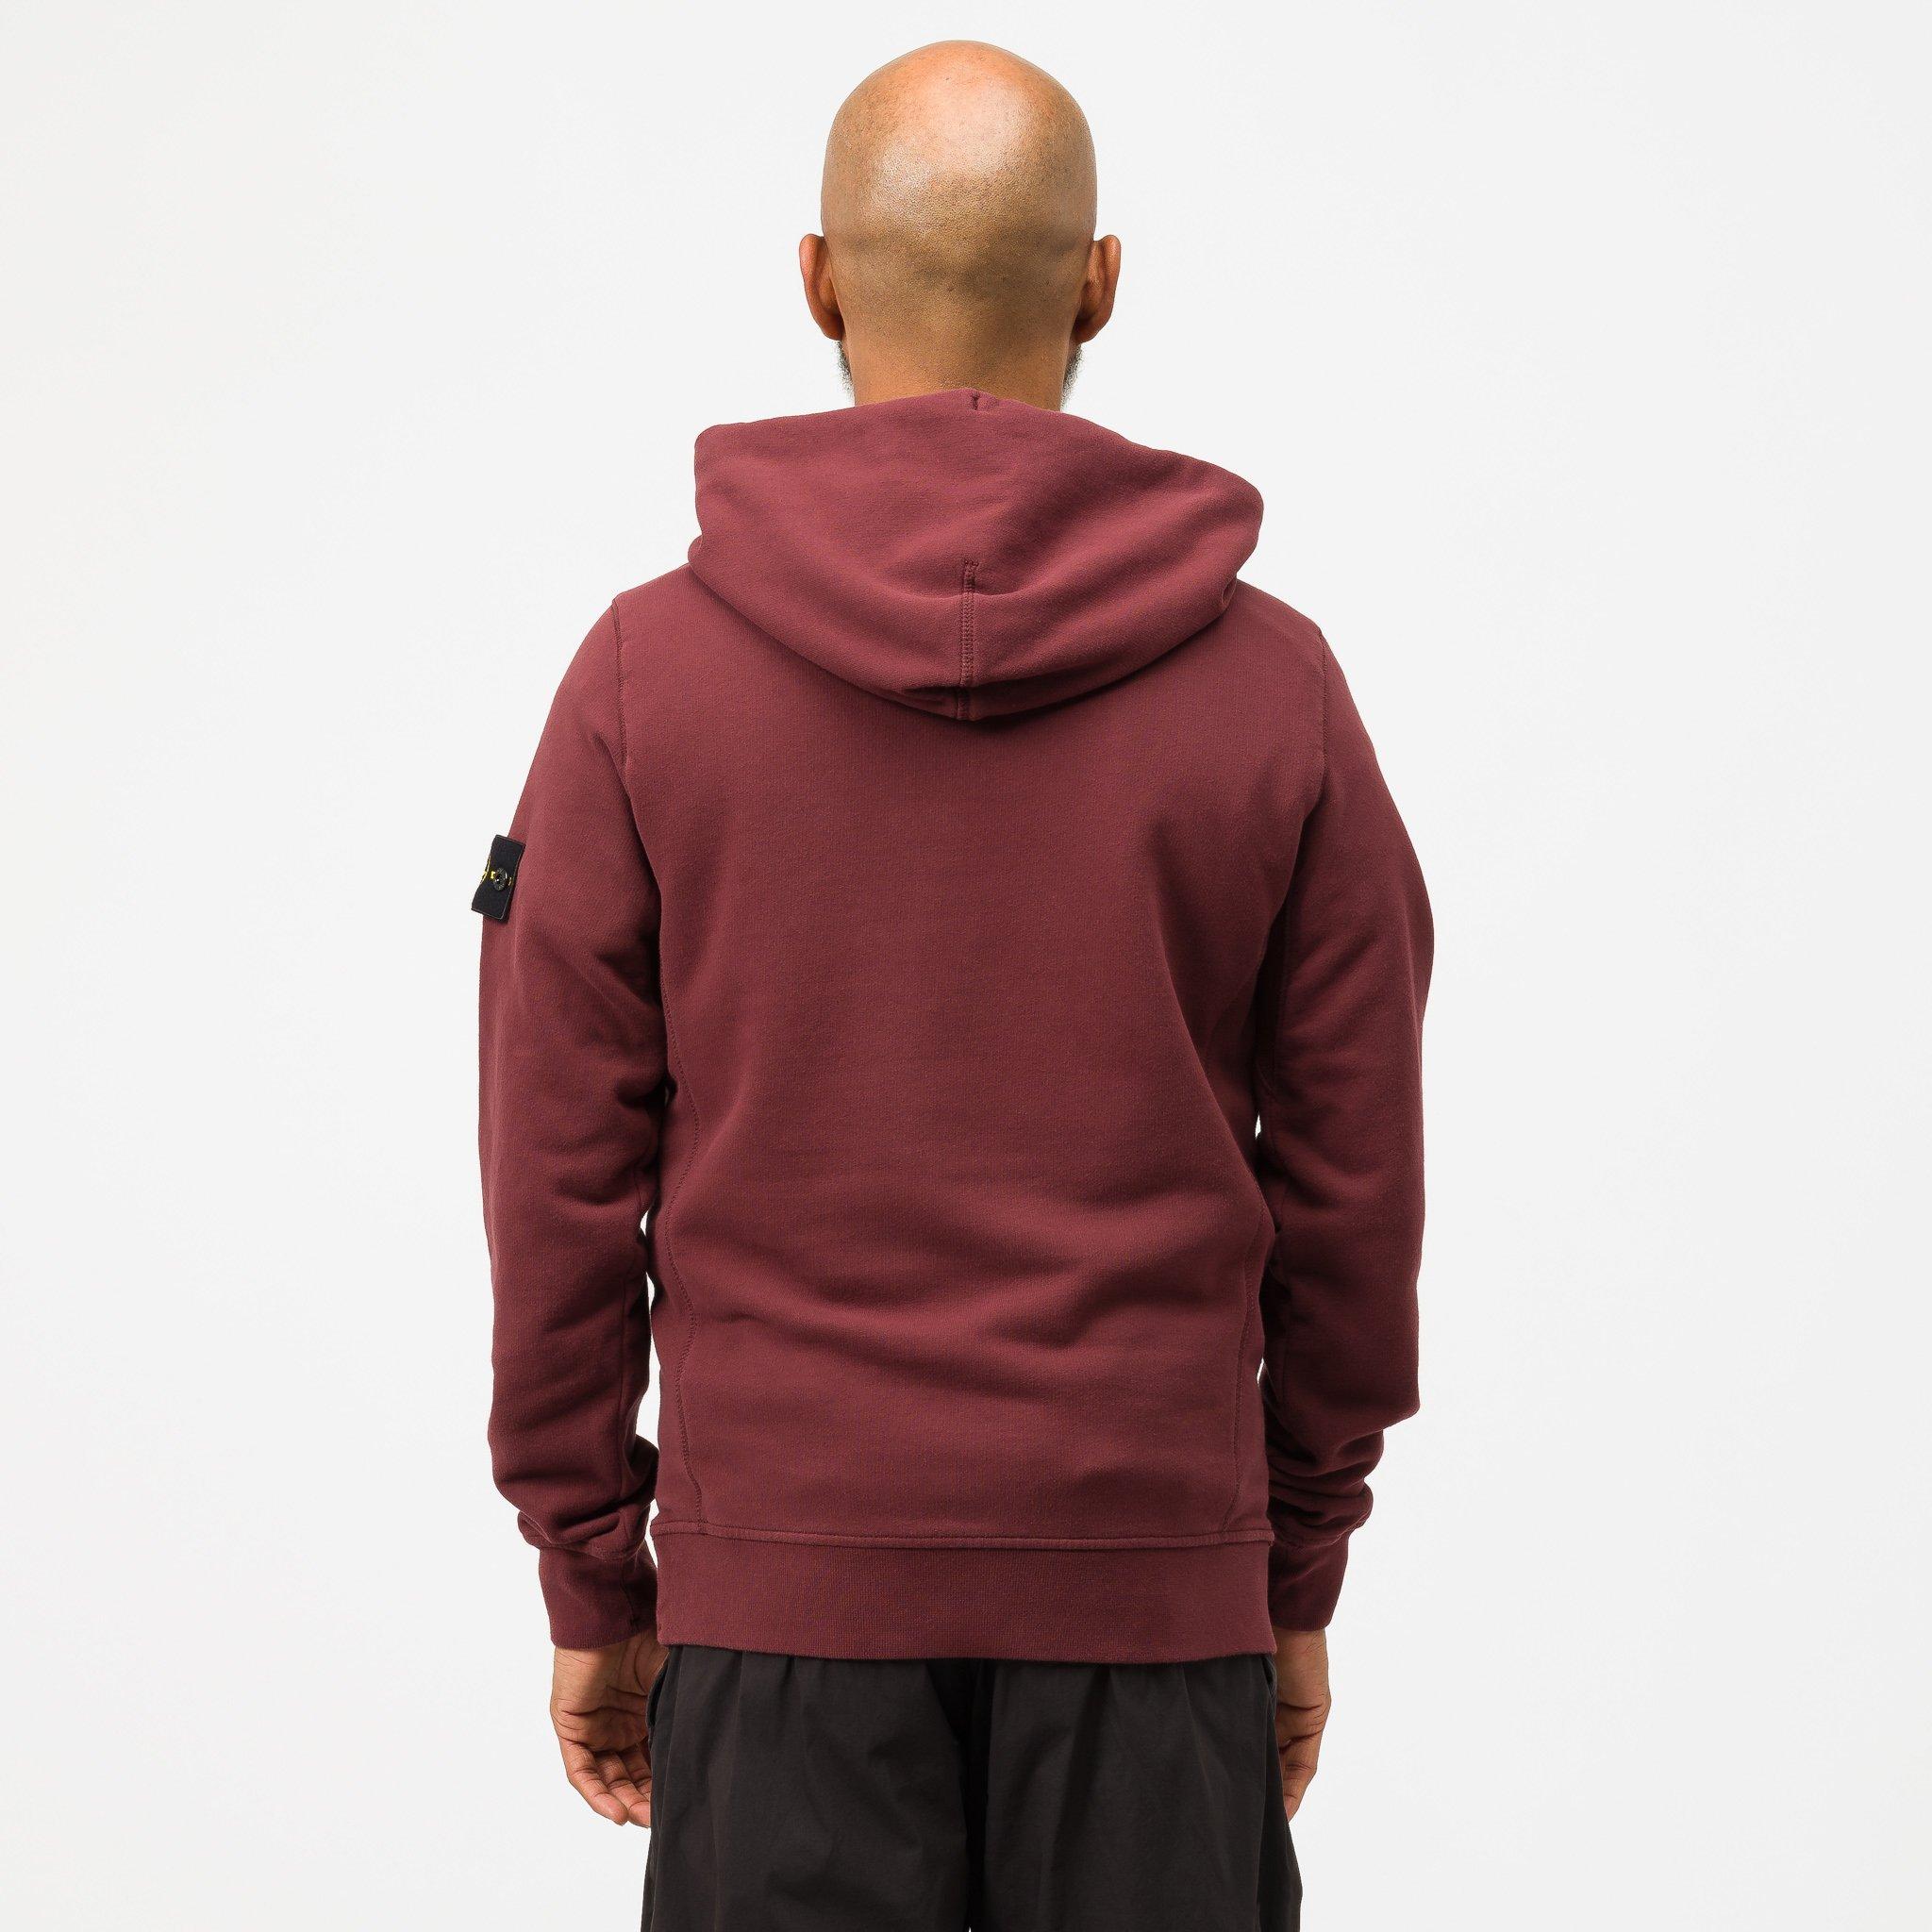 60520 Dyed Hooded Sweatshirt Black Outlet, SAVE 44% - lacocinadepao.com